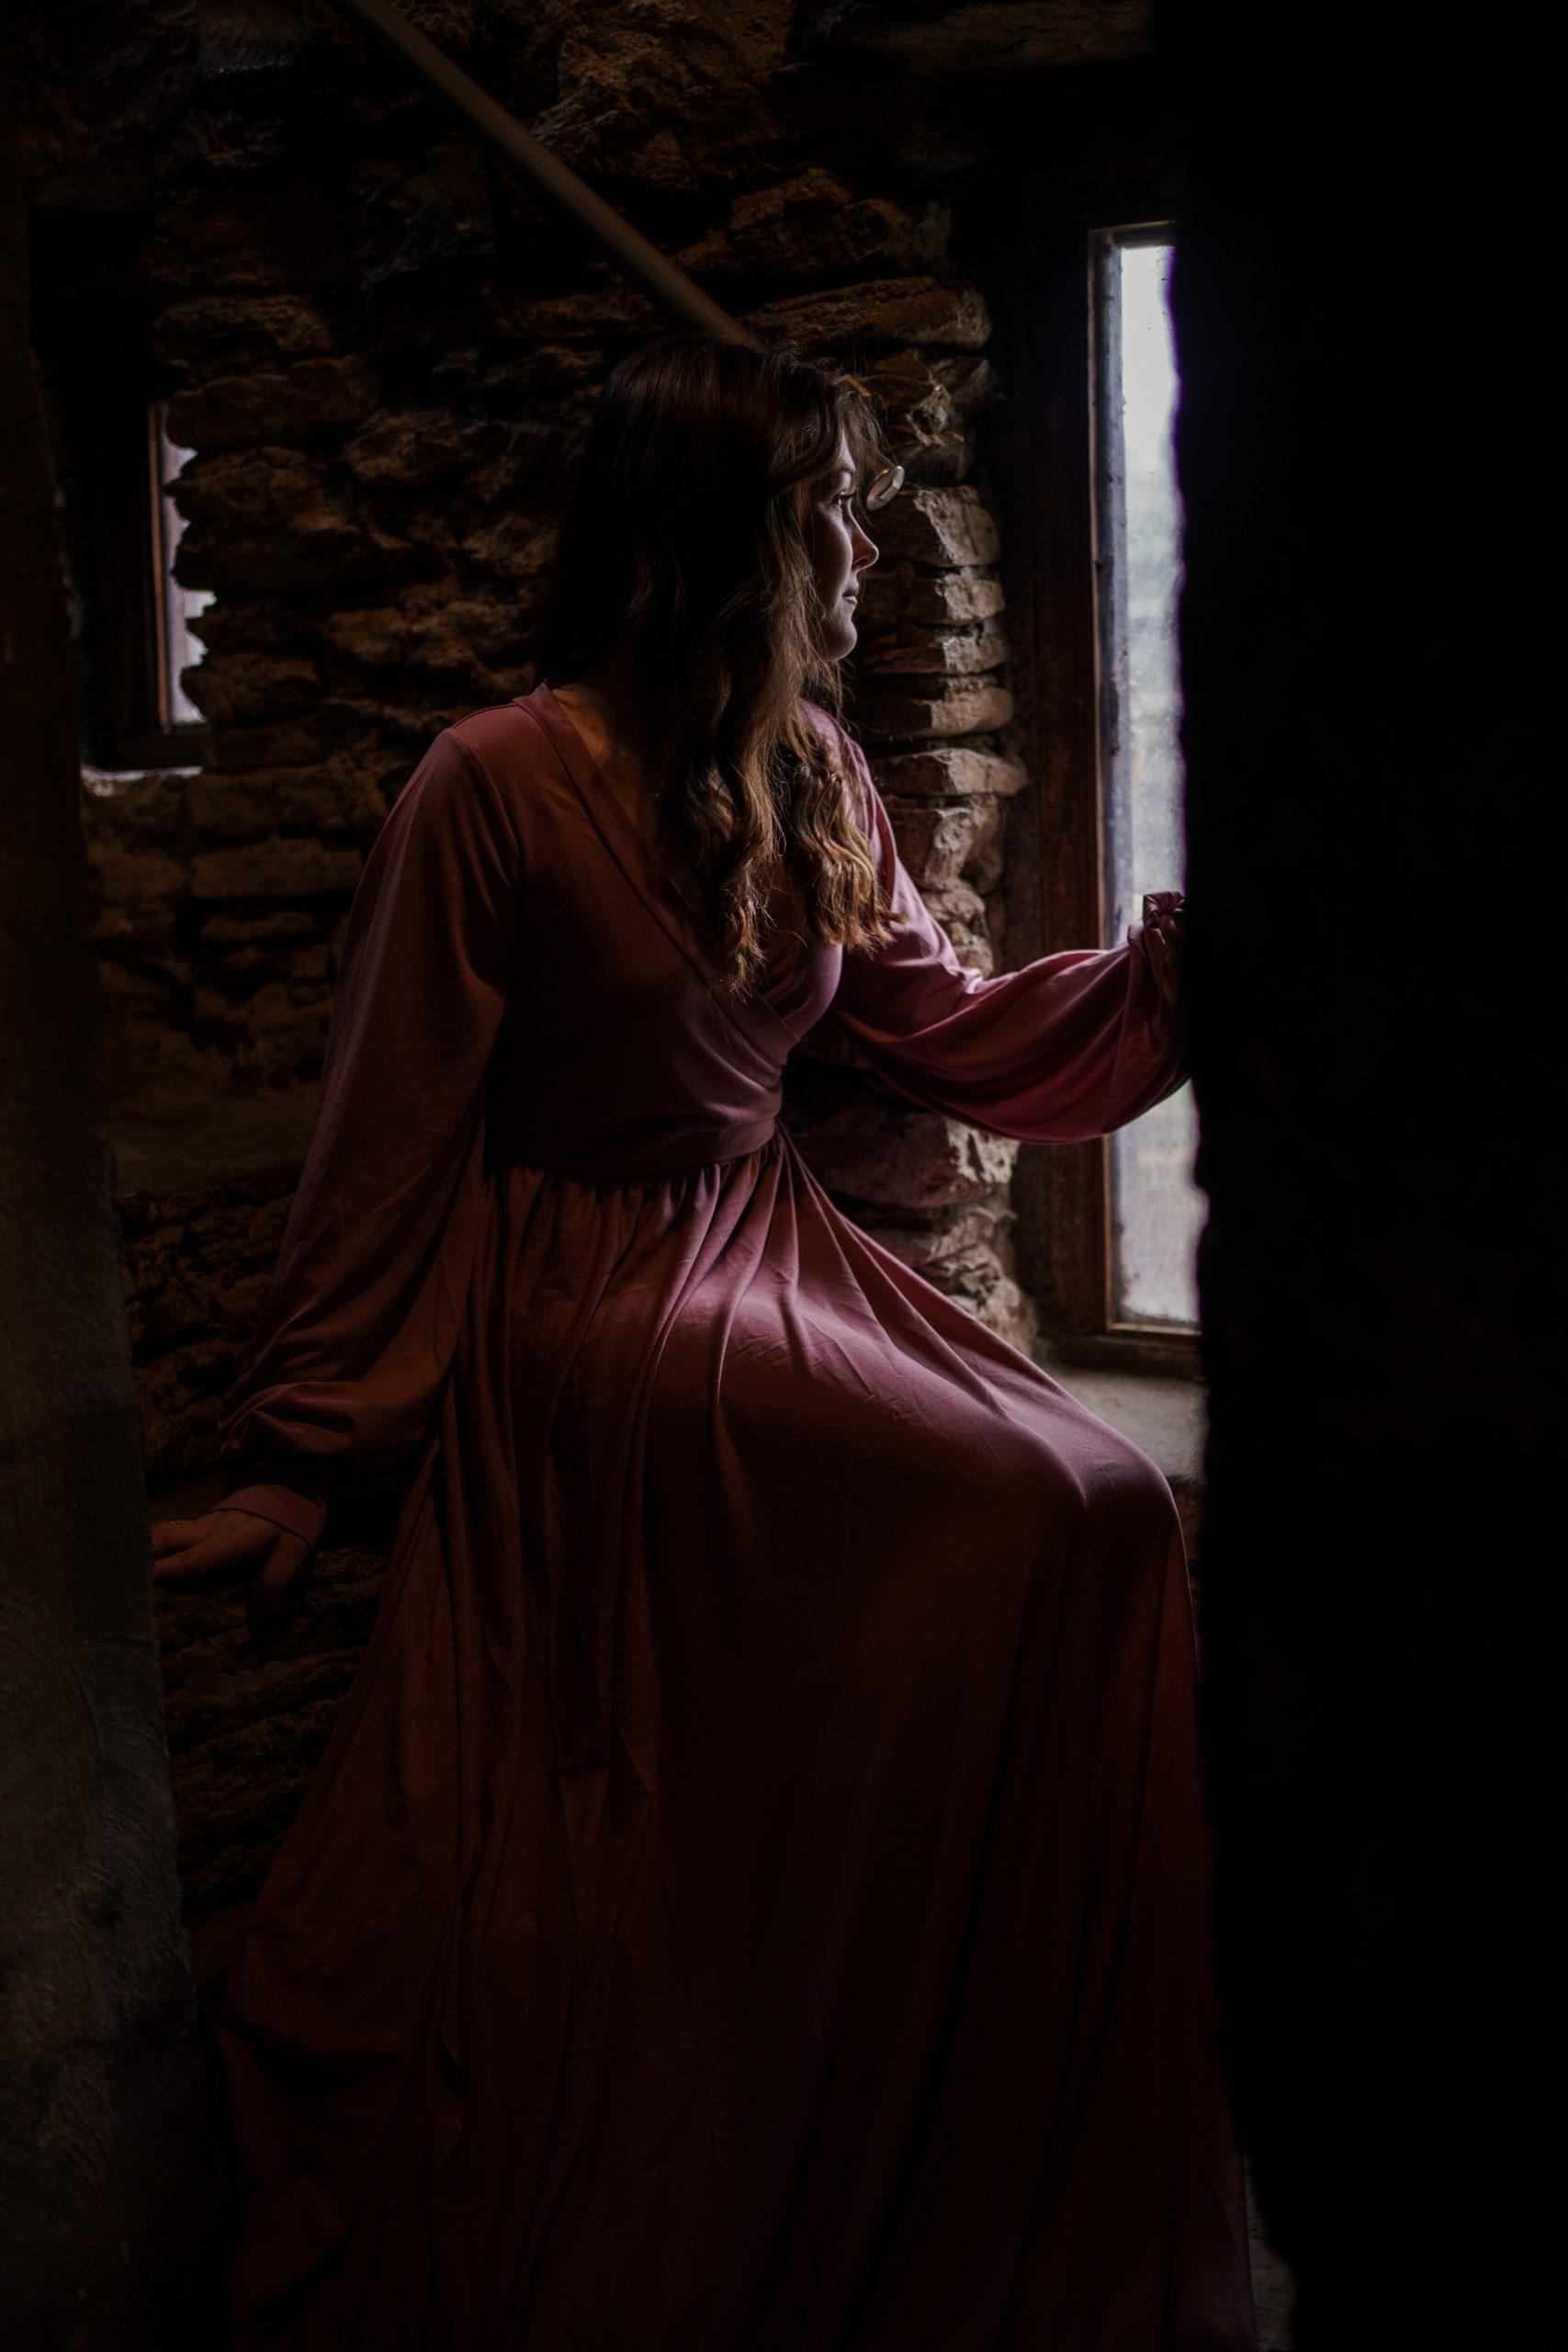 Loveland Castle Senior Session. Flowy dusty rose gown in the gardens. Sitting inside tower looking out window